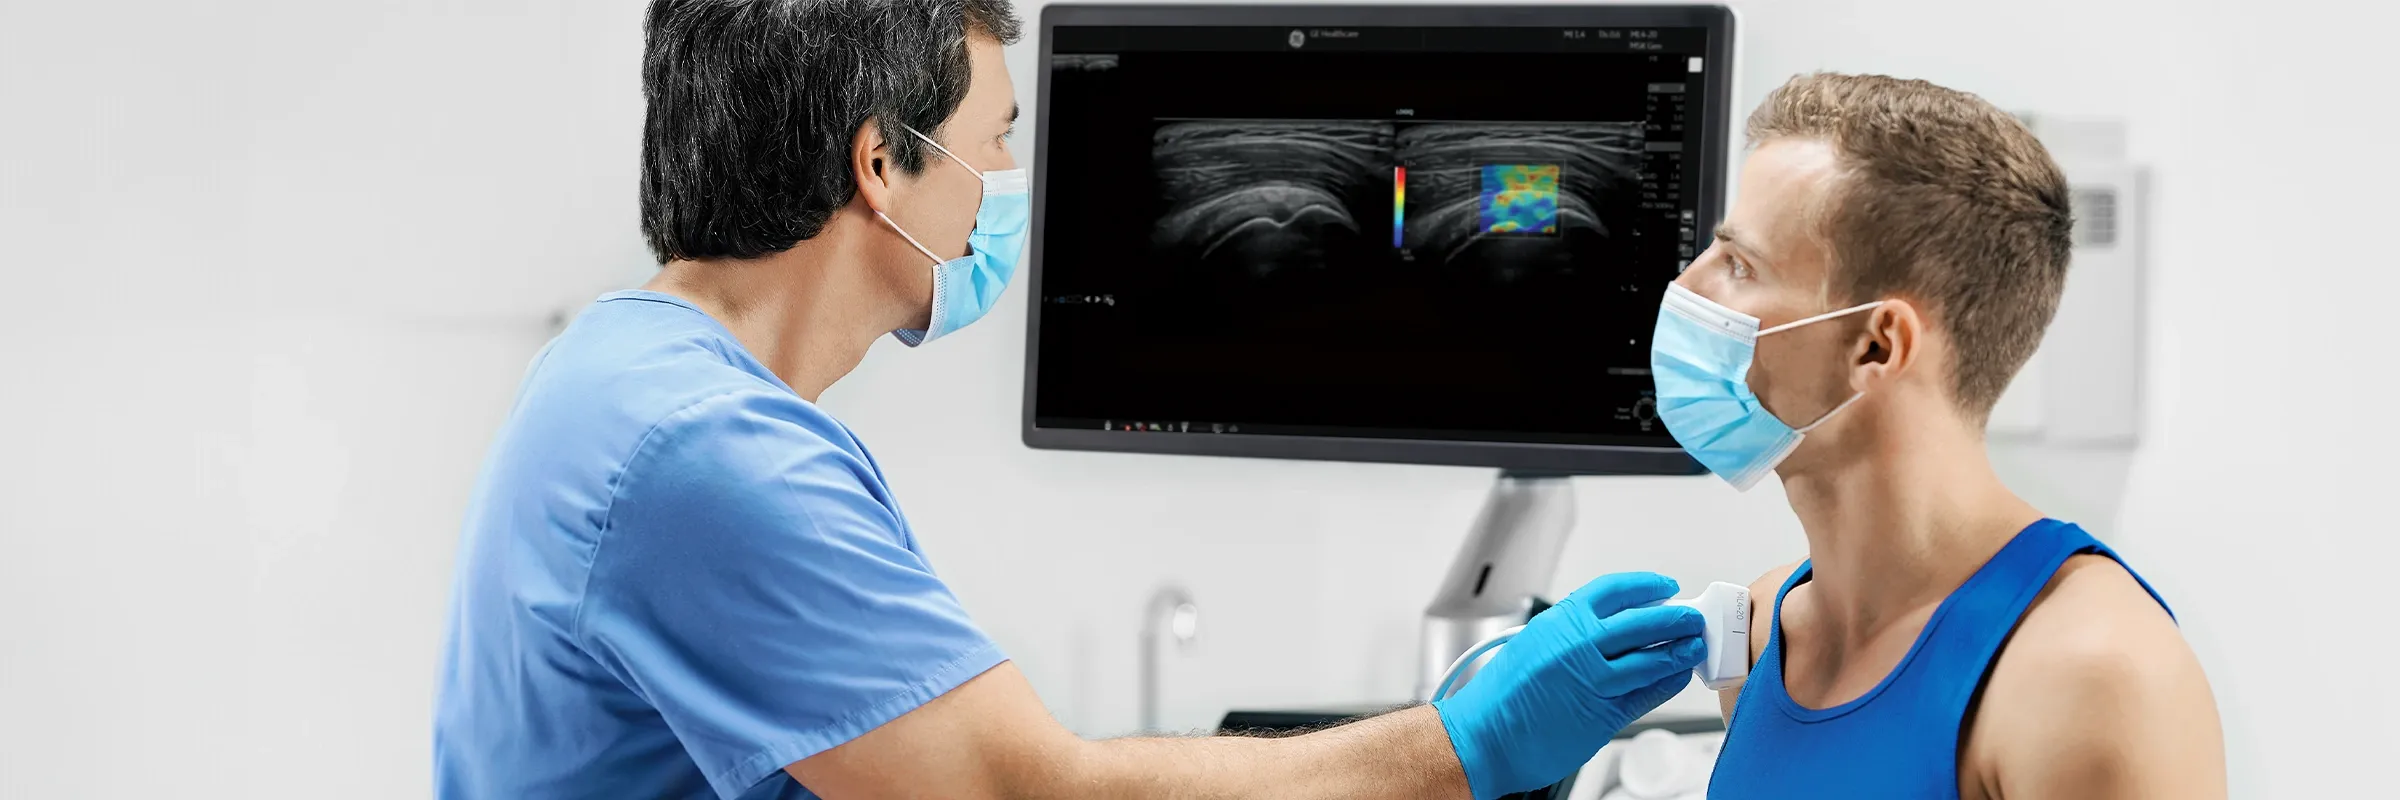 MSK Ultrasound for physical therapists – diagnosis, treatment and research